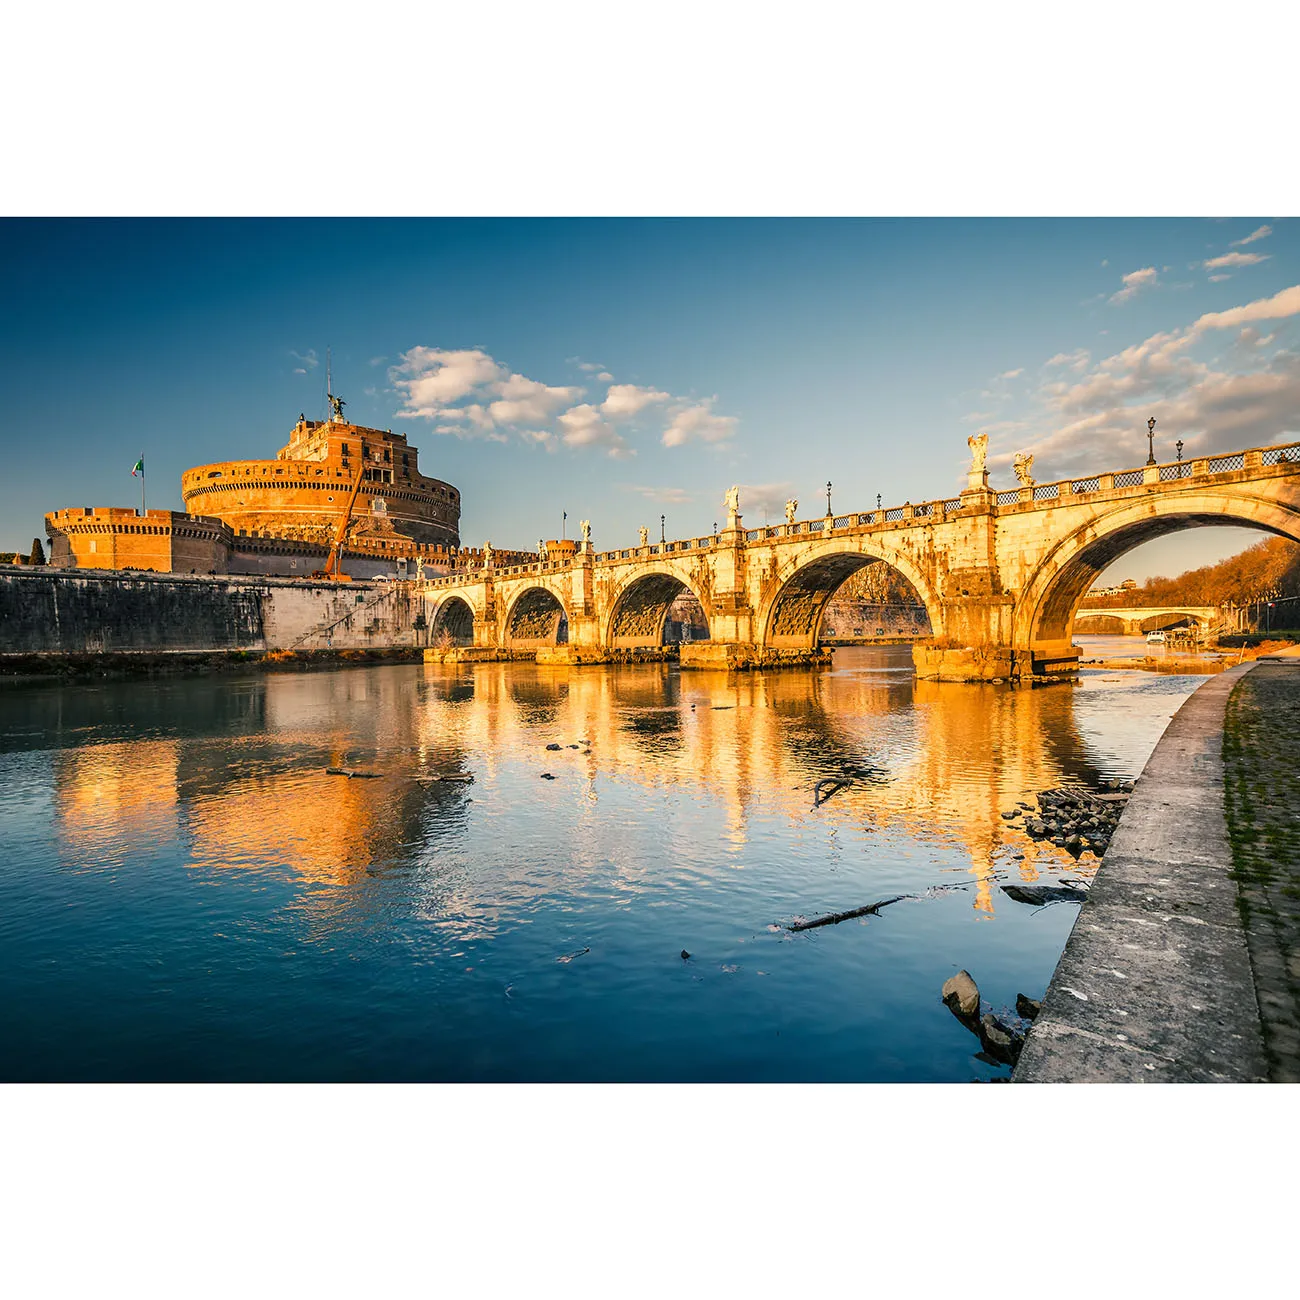 Saint Angel Castle and Bridge over the Tiber River in Rome Italy Tourist Attractions Photography Background Photo Backdrop